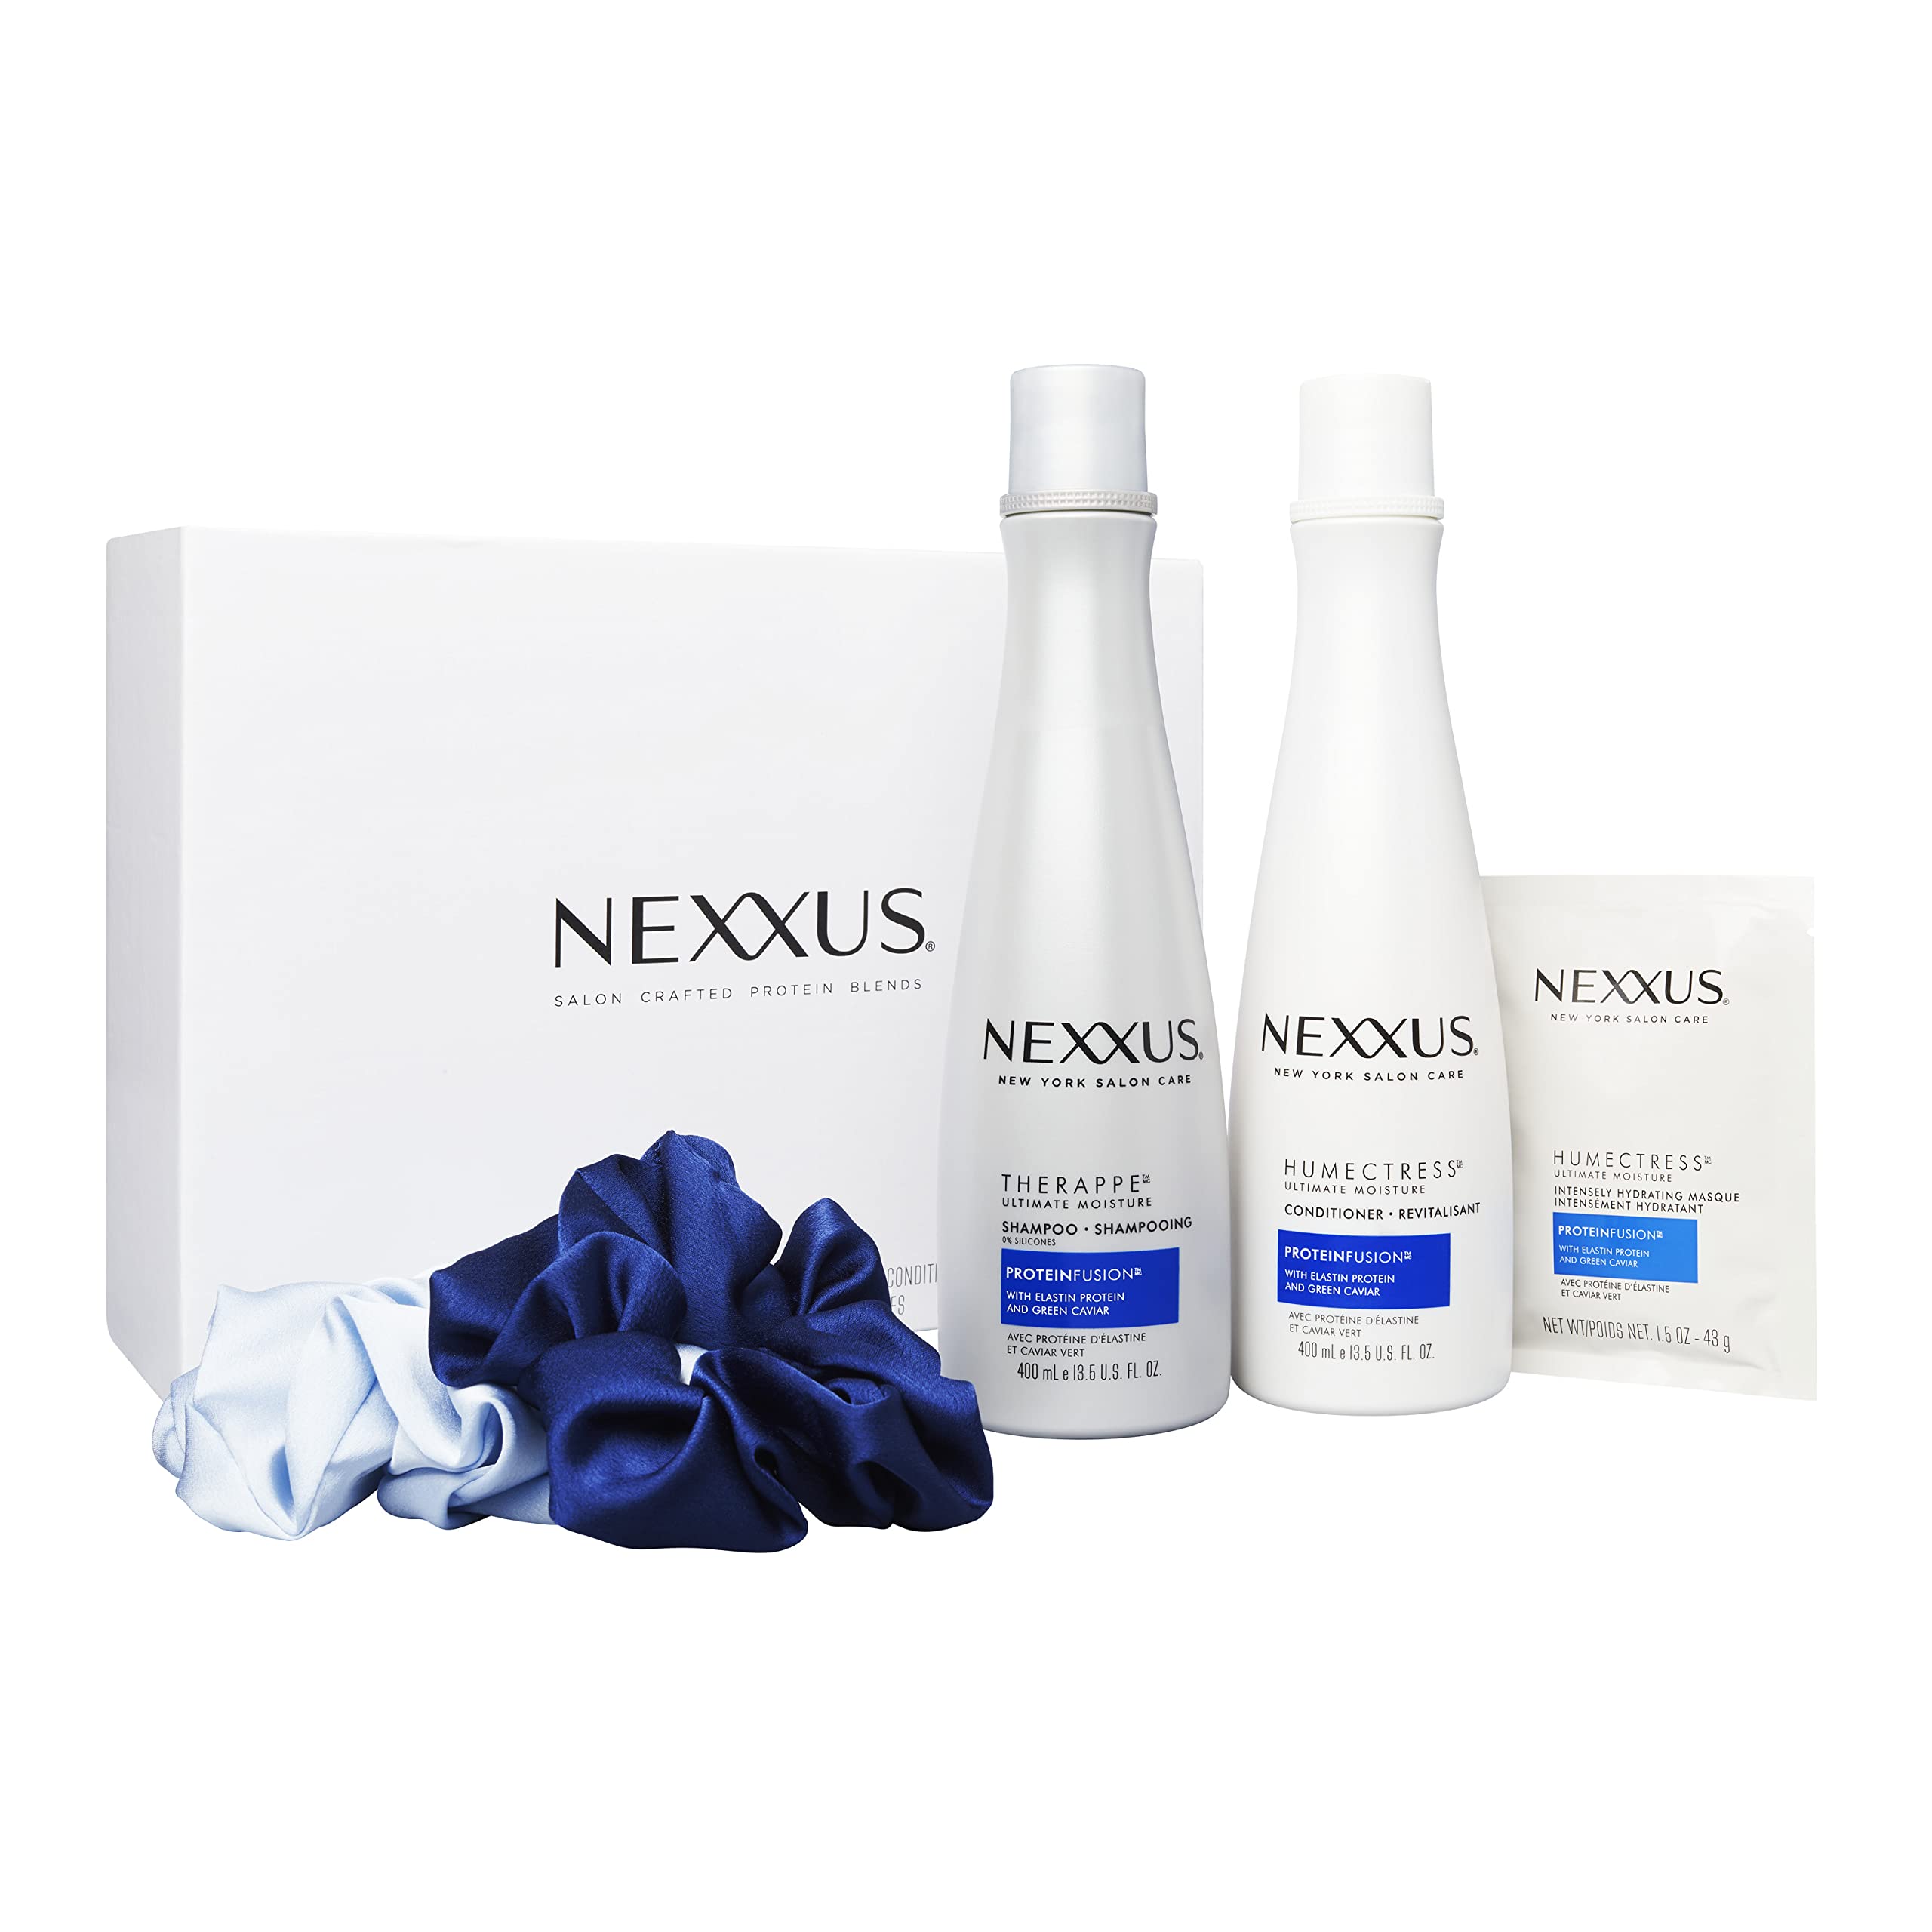 Nexxus Therappe Shampoo Ultimate Moisture For Dry Hair Silicone-Free 13.5 oz